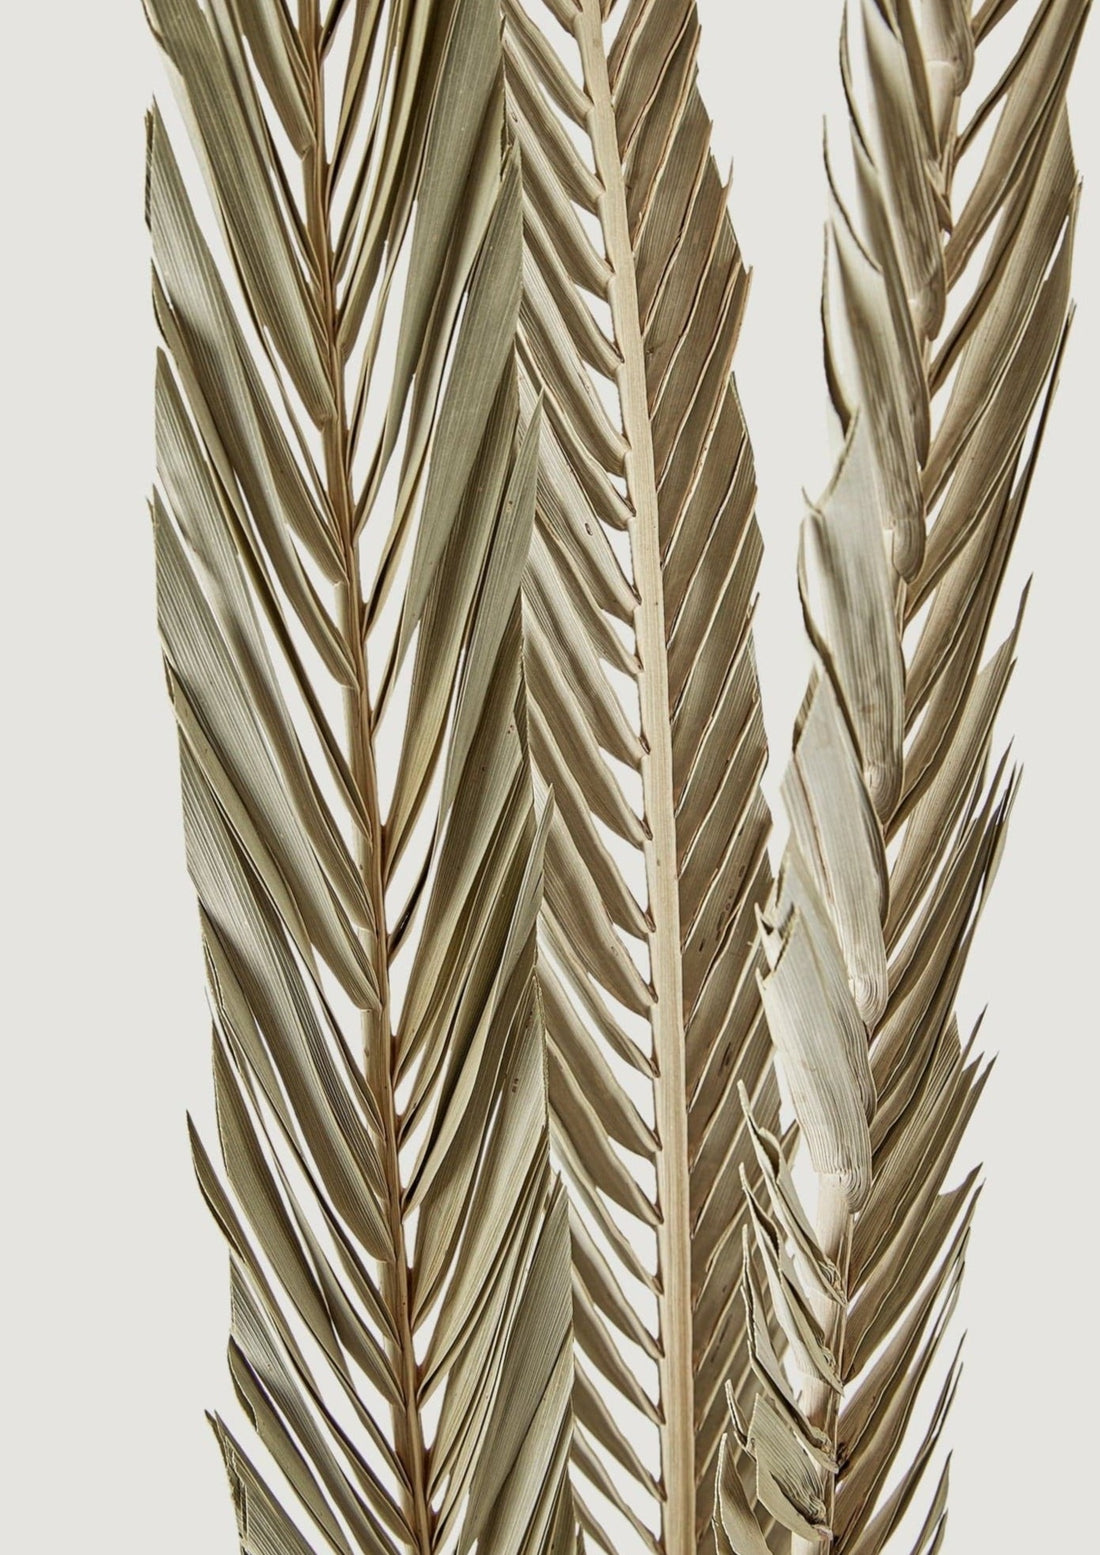 Dried Sword Palm Leaves in Afloral Closeup View